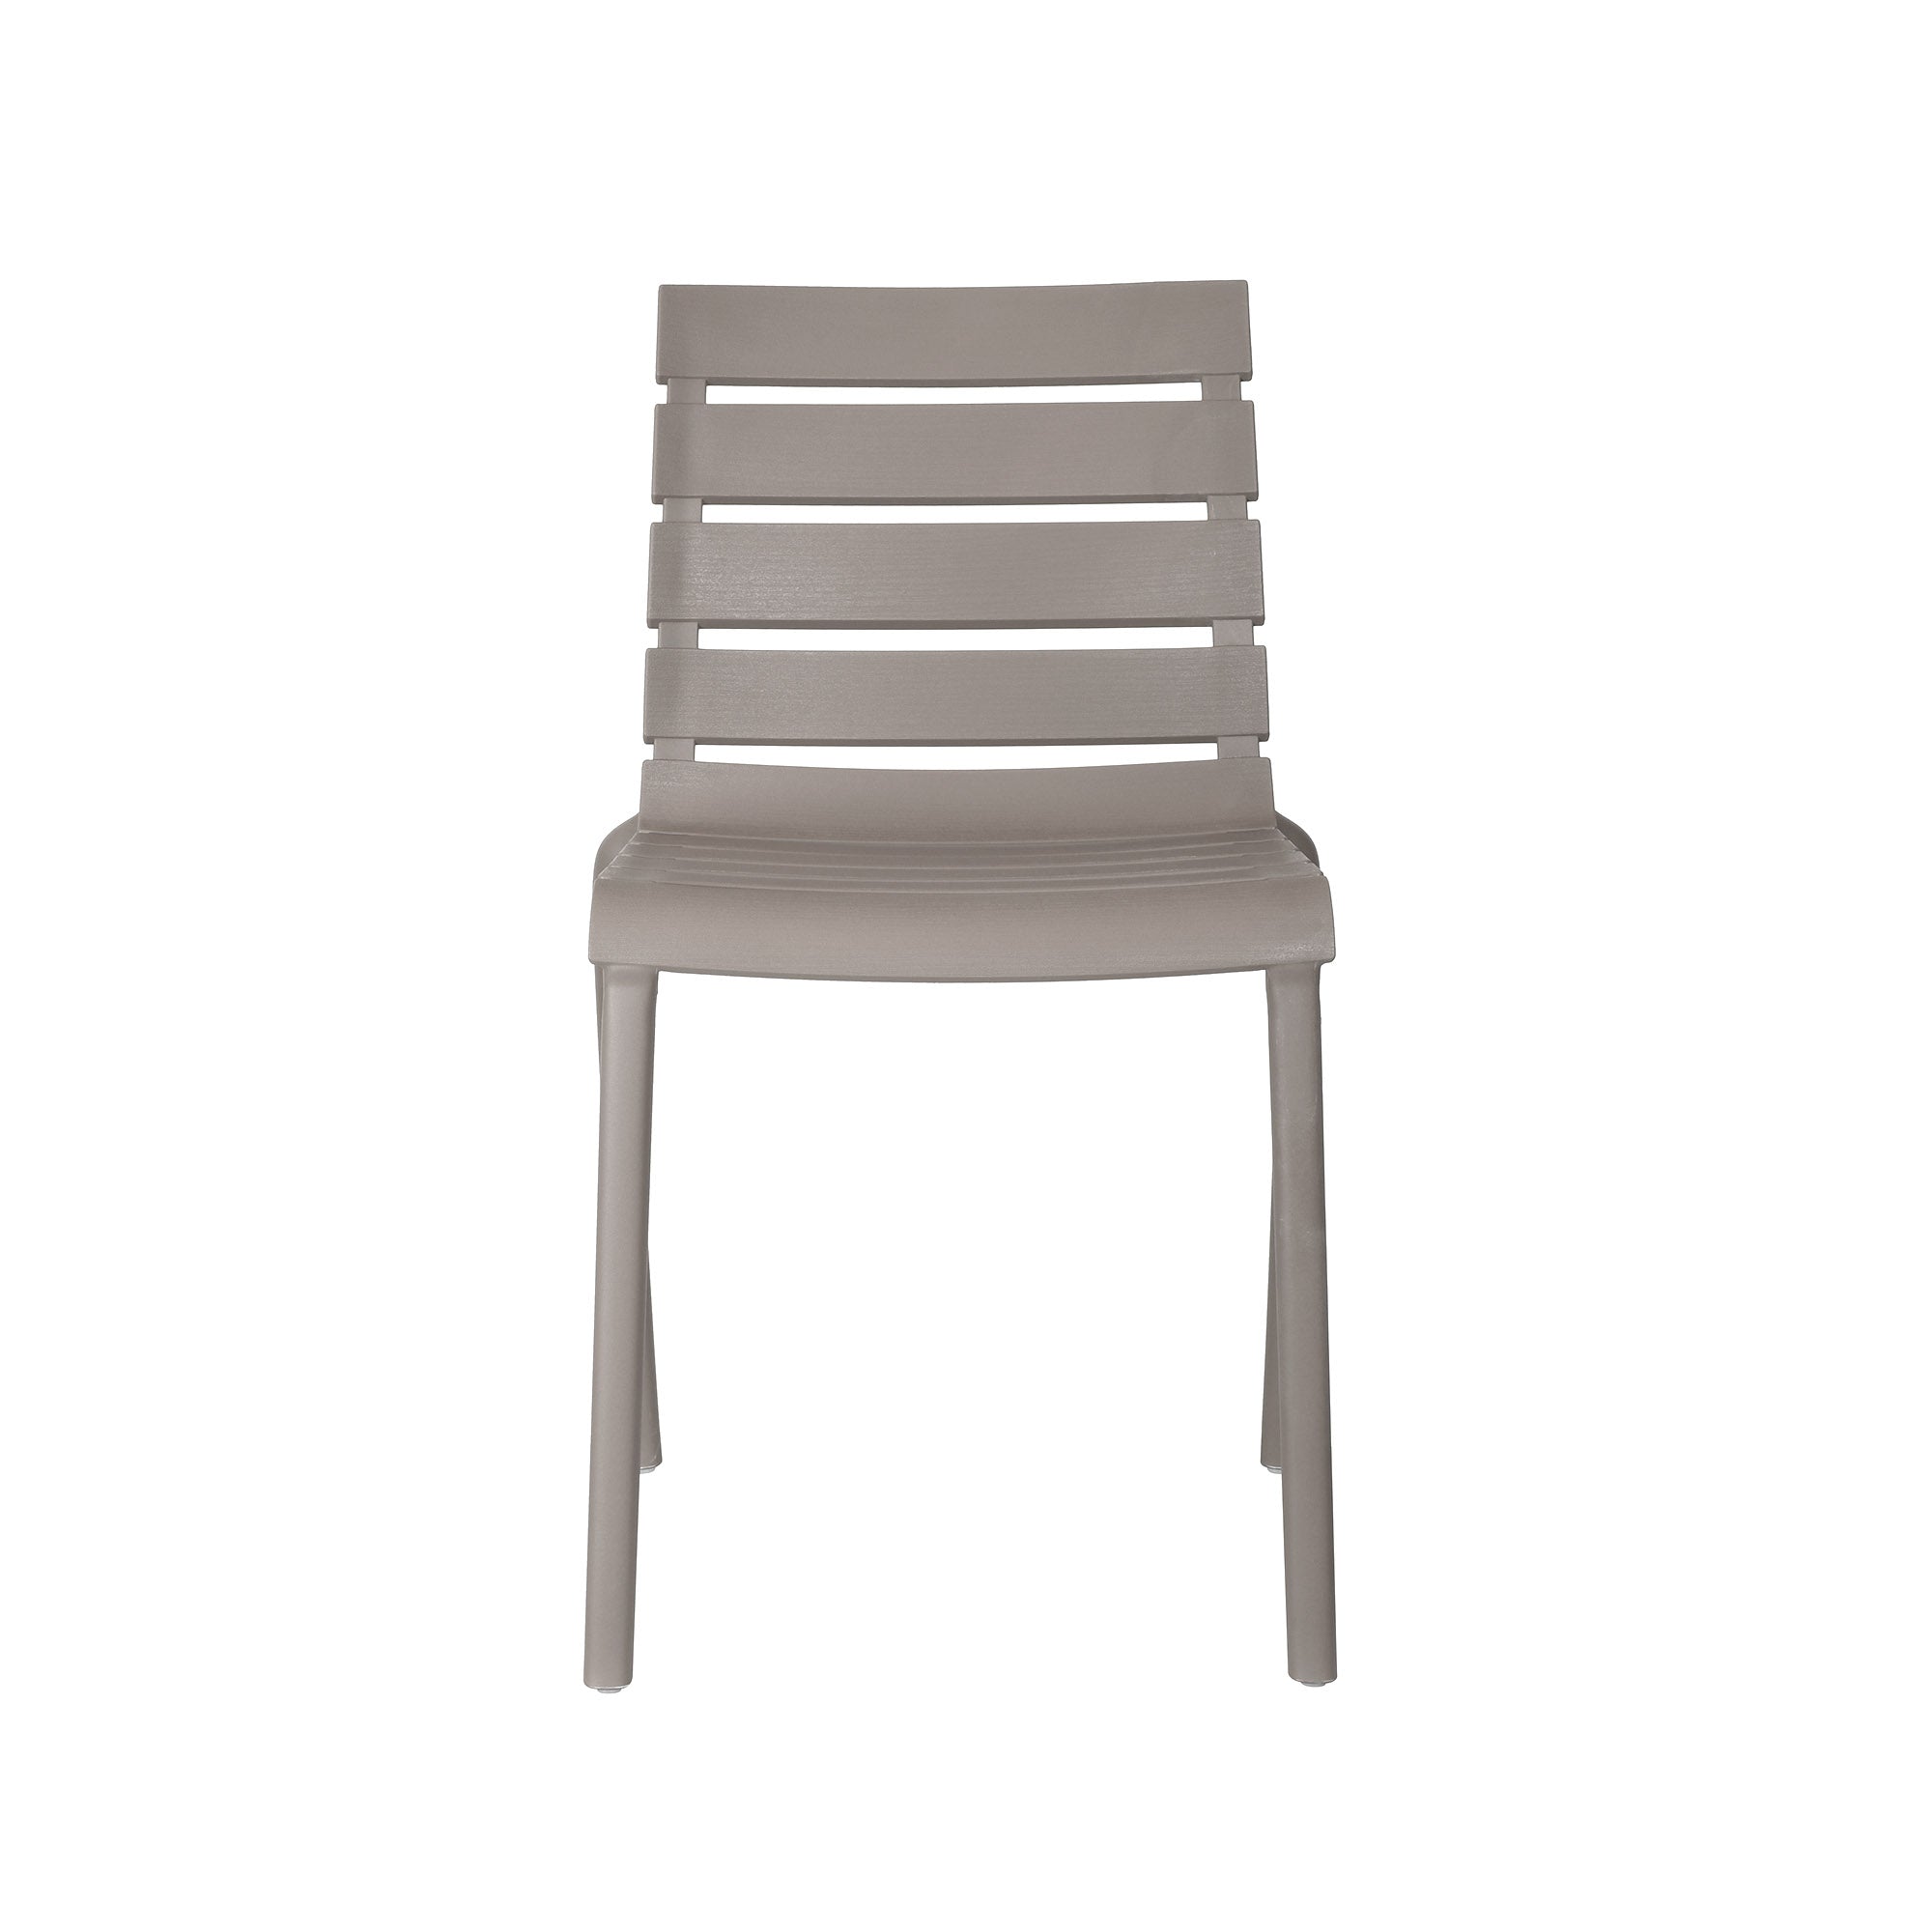 Rylan Indoor and Outdoor Stackable Chair - Rustic Taupe - Set of 4